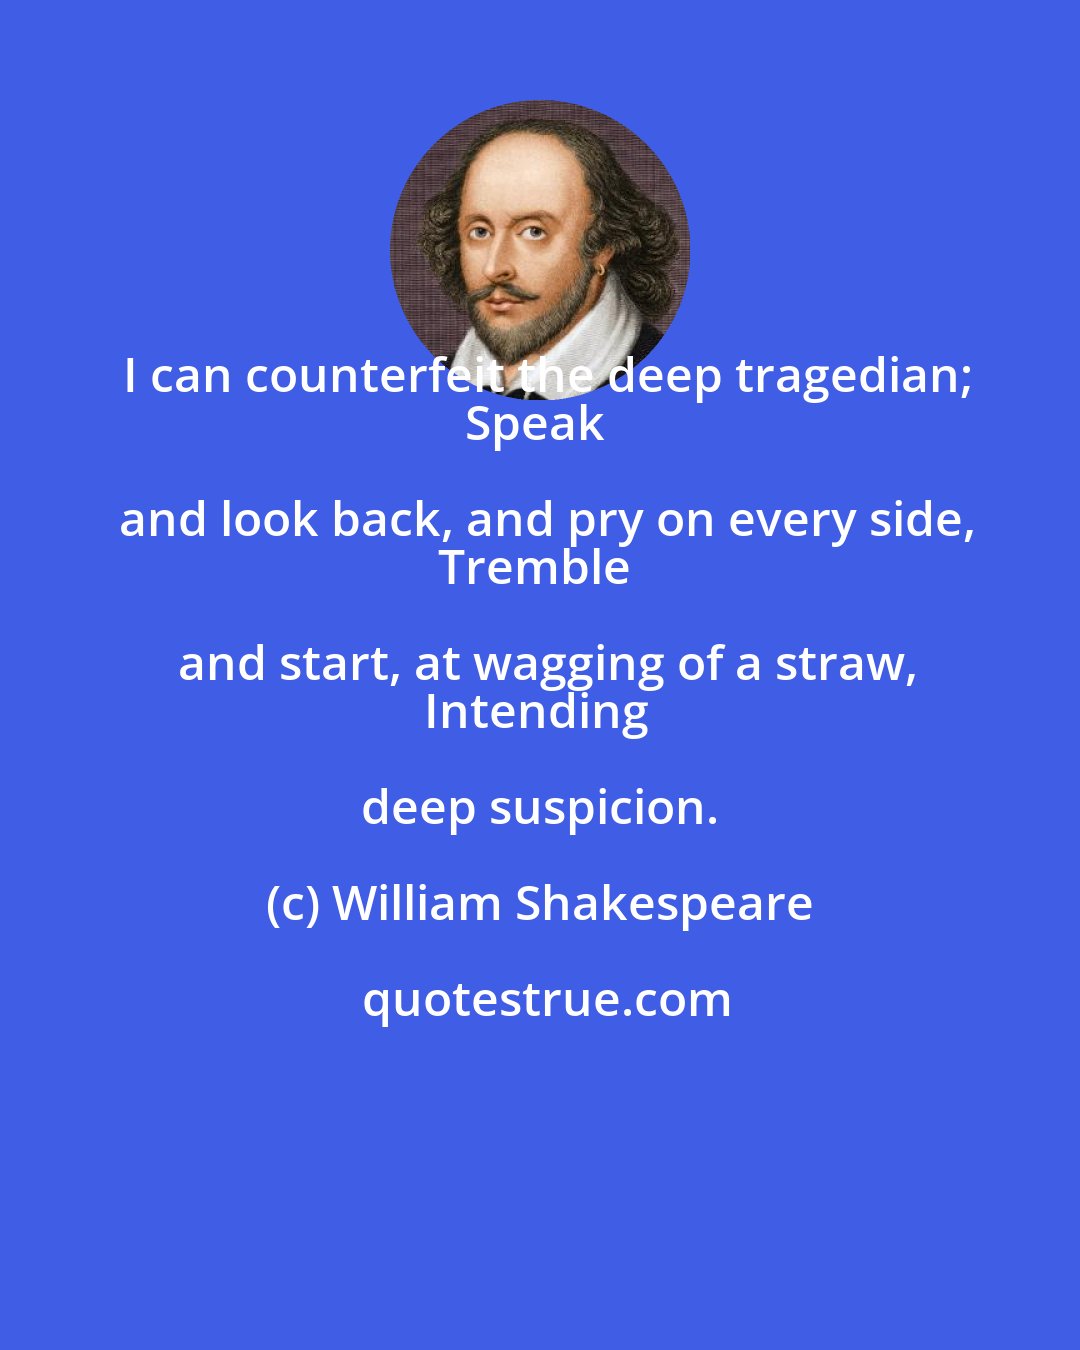 William Shakespeare: I can counterfeit the deep tragedian;
Speak and look back, and pry on every side,
Tremble and start, at wagging of a straw,
Intending deep suspicion.